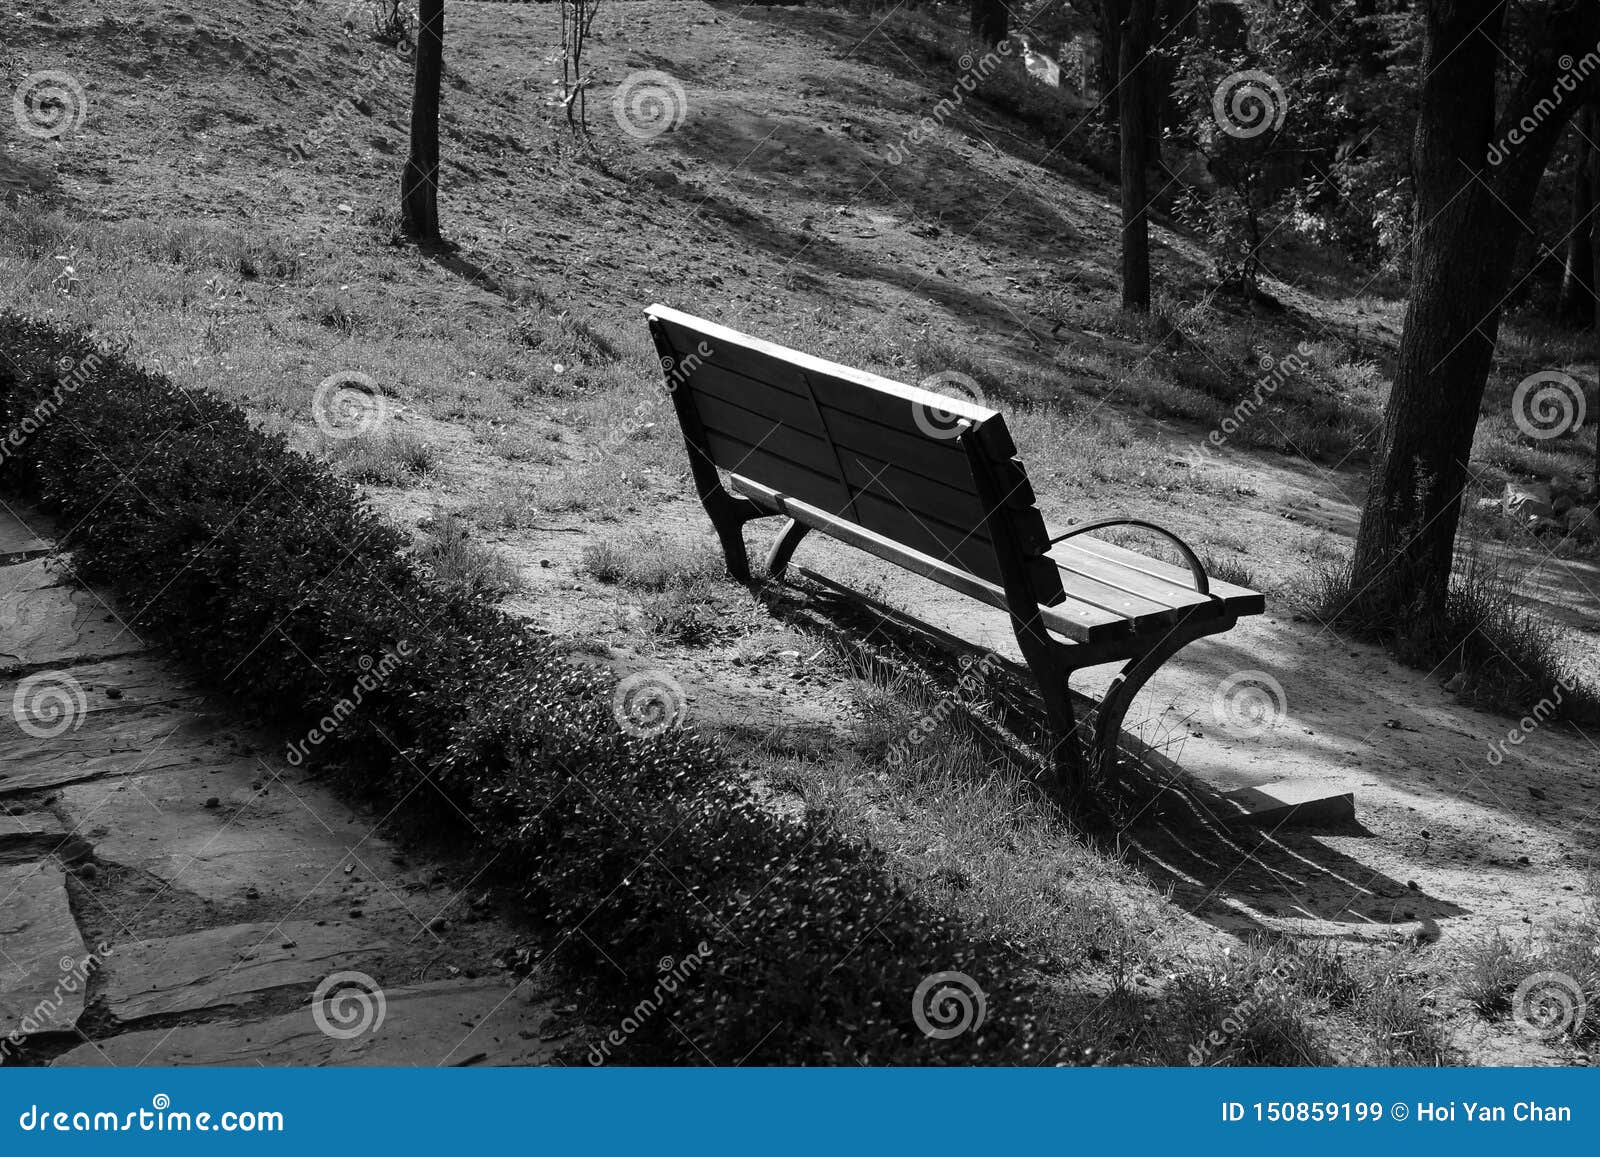 Black And White Bench In The Woods Stock Image - Image of ...